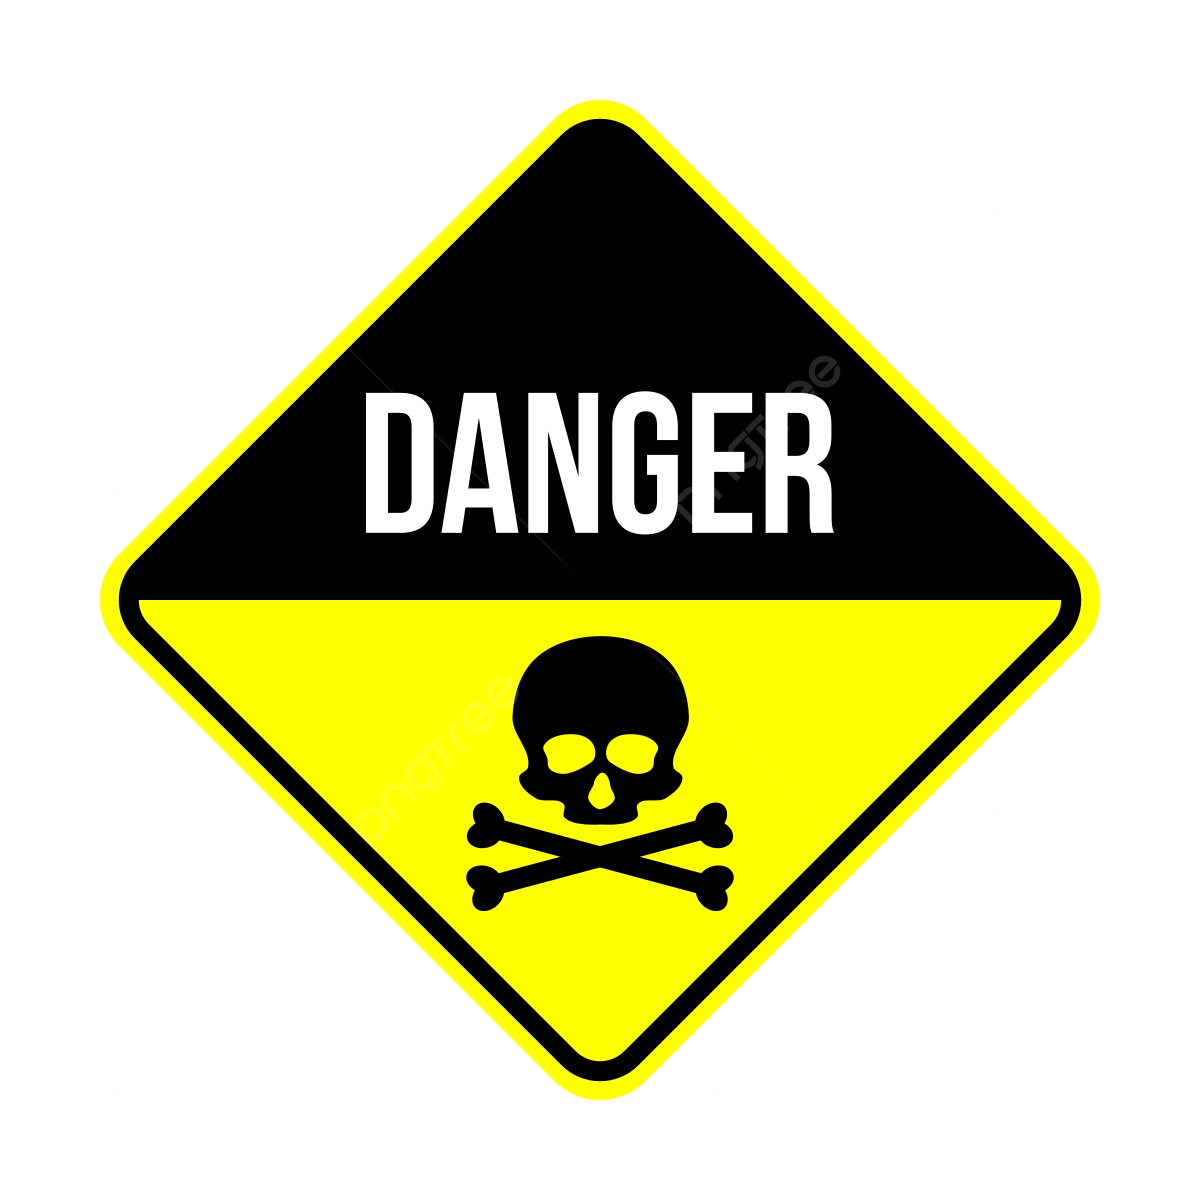 pngtree-danger-sign-with-skull-icon-png-image_8993616